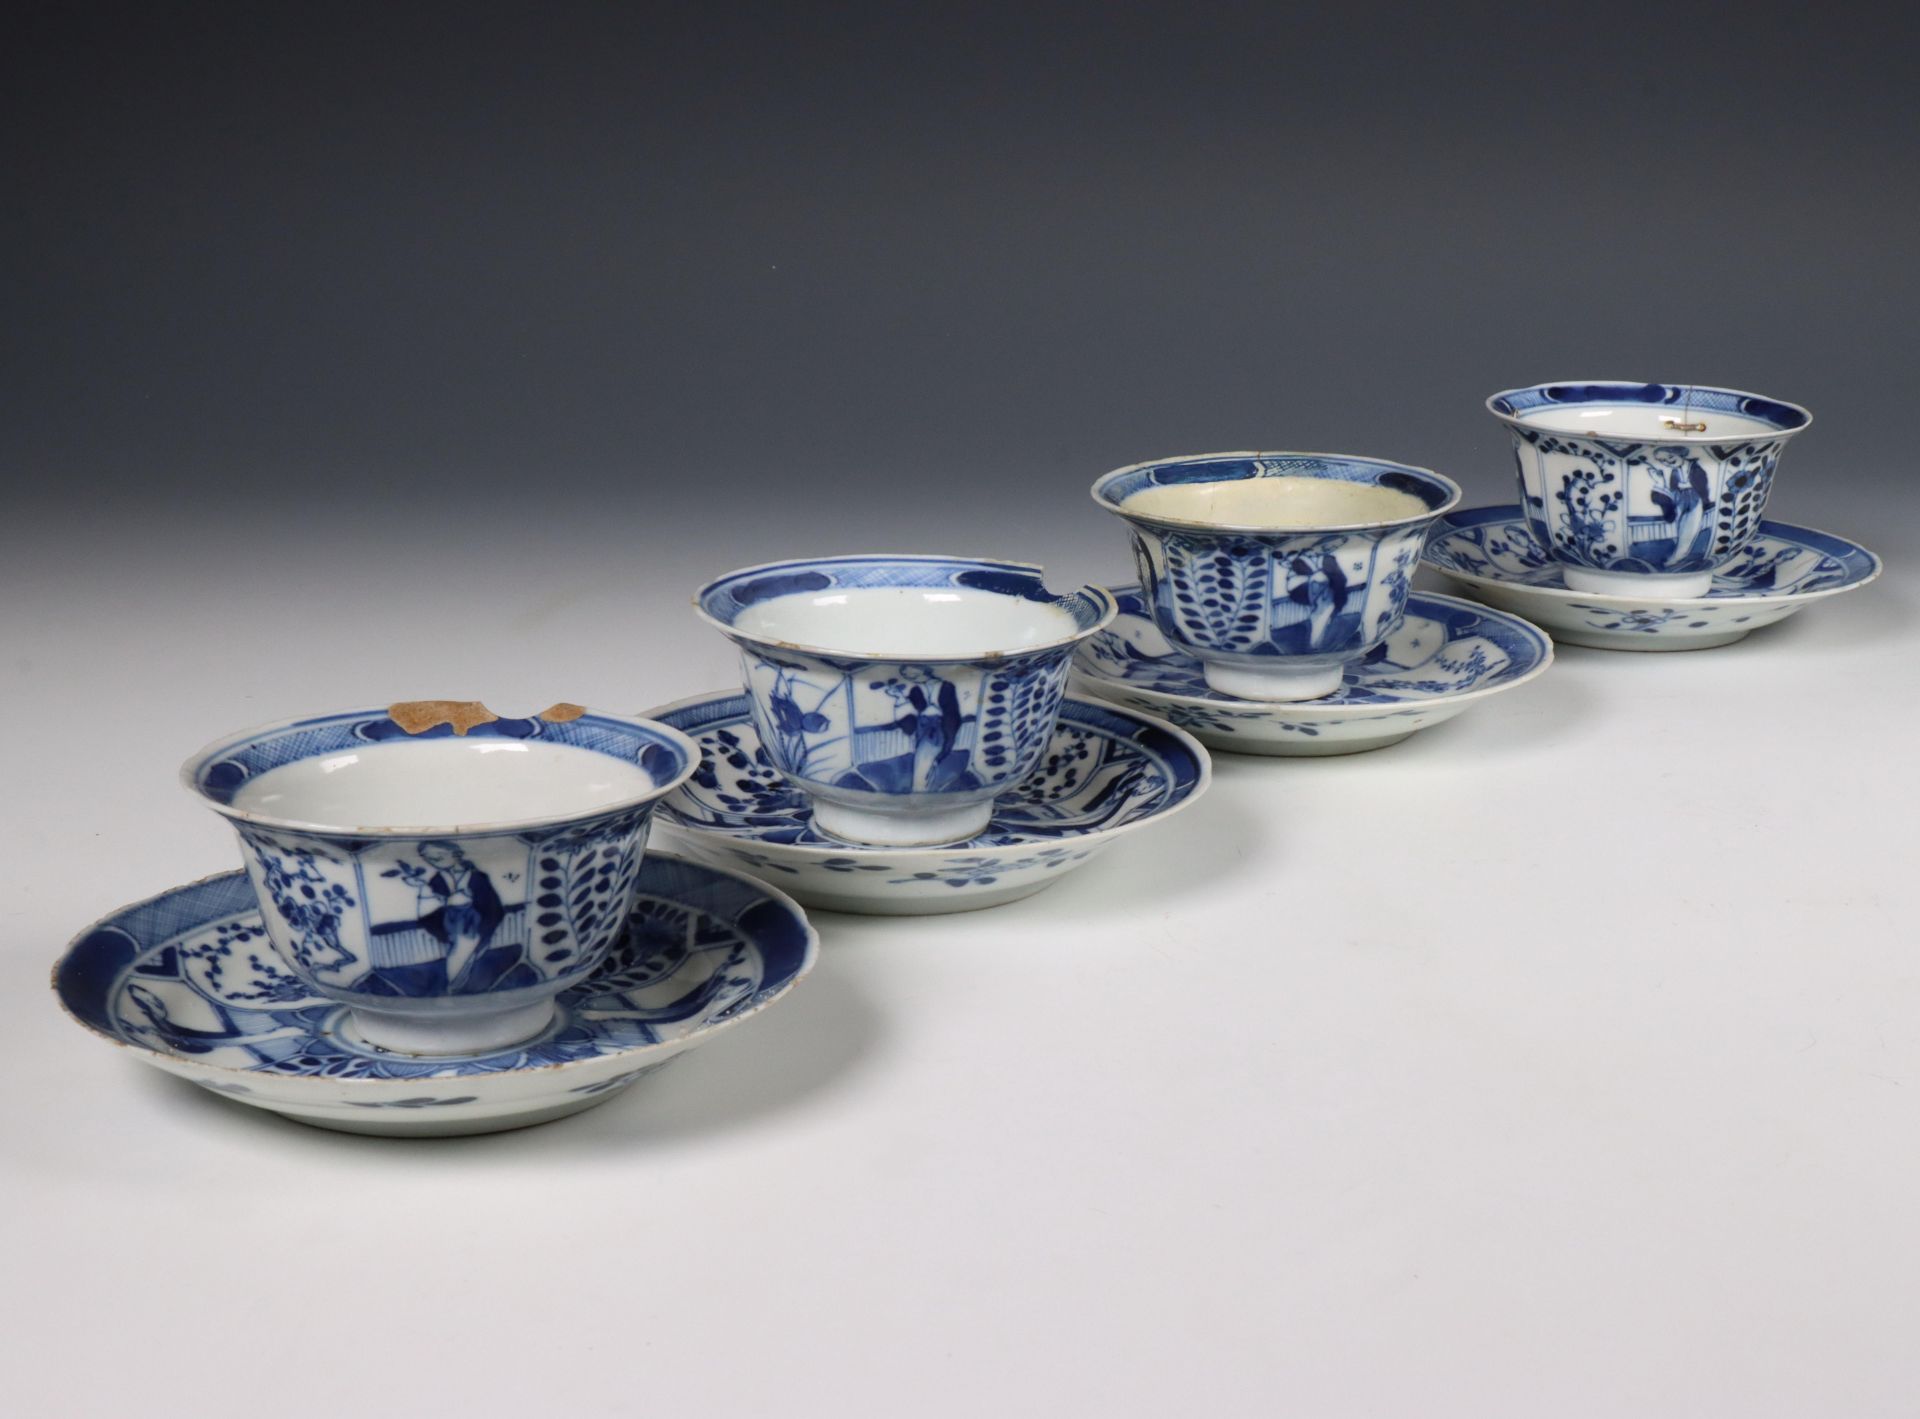 China, associated set of twelve blue and white porcelain tea bowls and eleven saucers, Kangxi period - Image 4 of 4